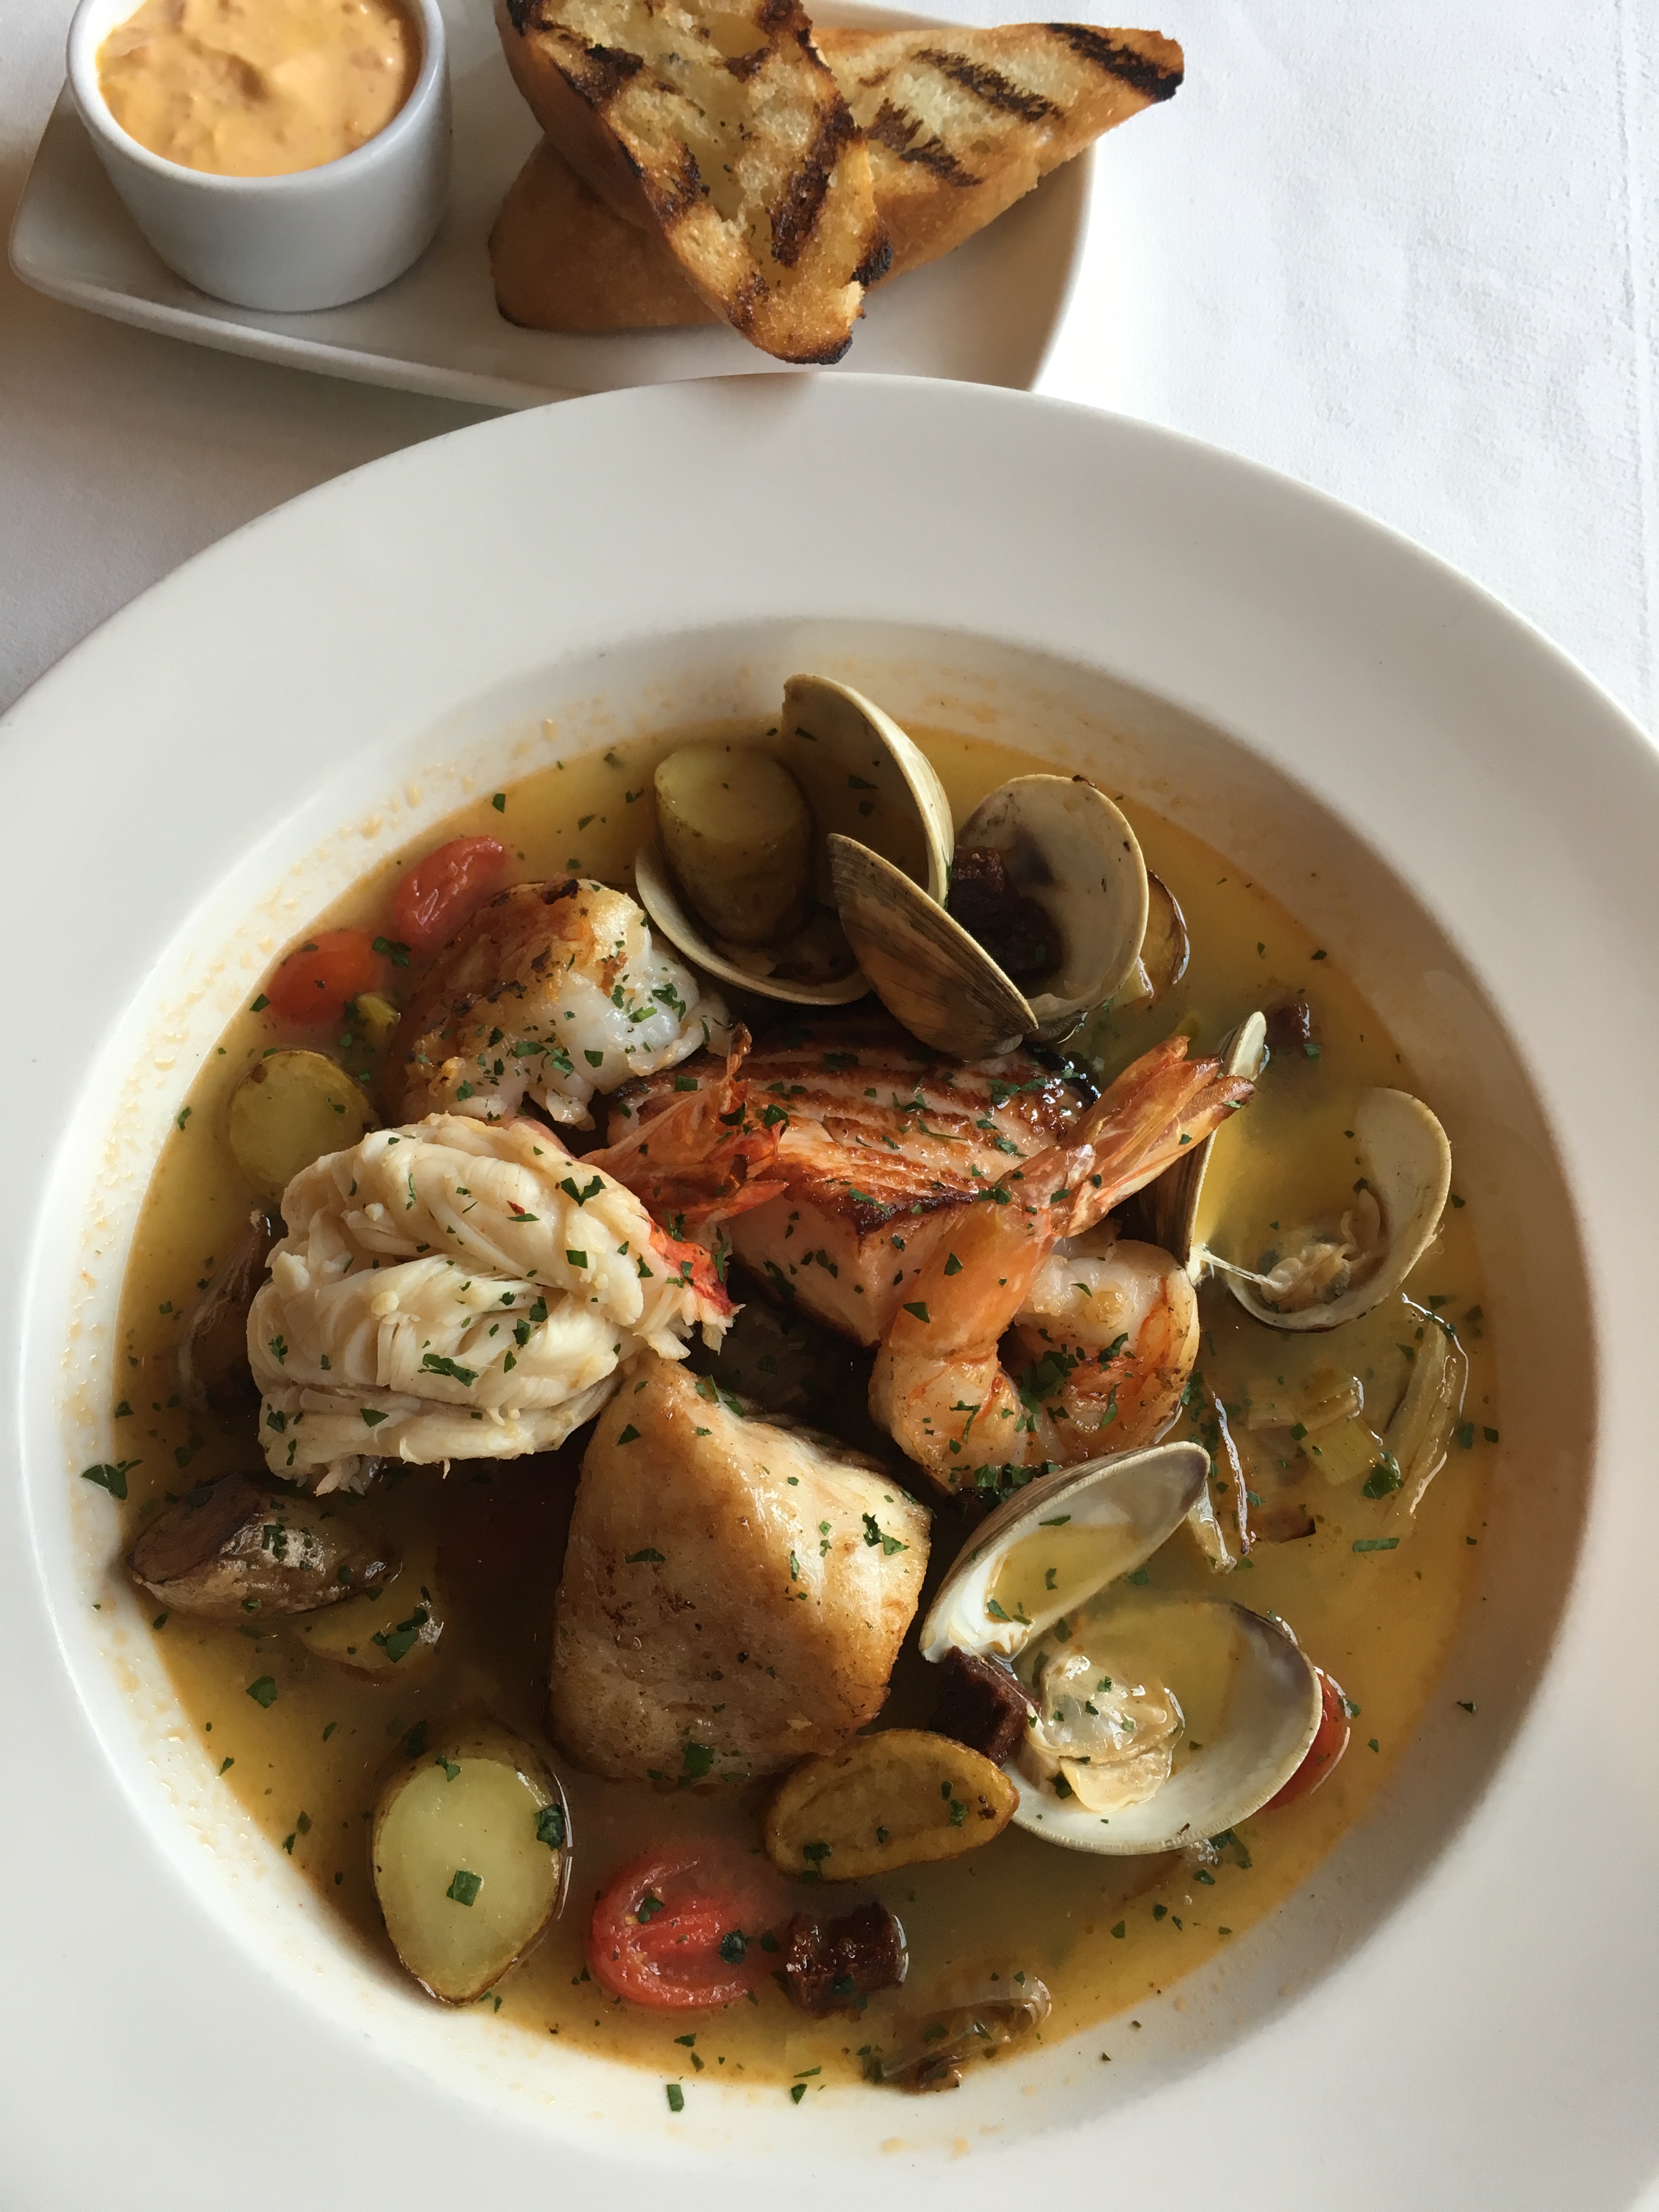 Bouillabaisse prepared with Alaskan Halibut, Bay of Fundy Salmon, White Shrimp, Littleneck Clams and a Lobster Tail.